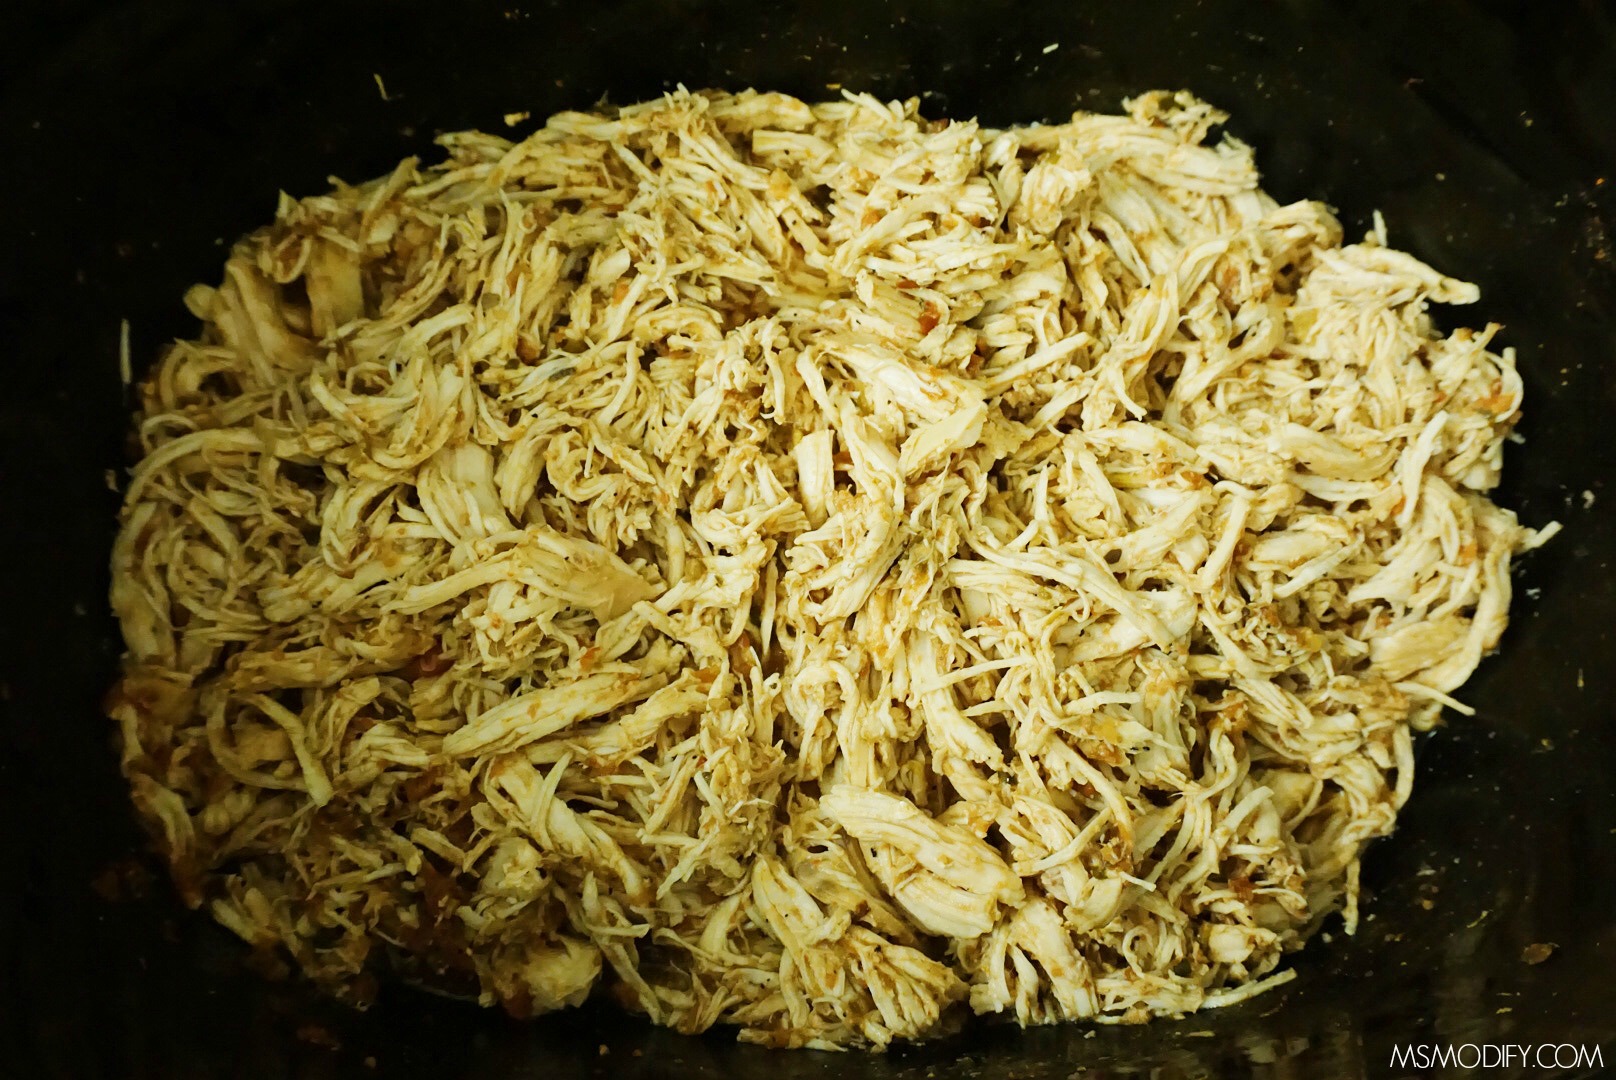 Slow Cooker Shredded Mexican Chicken - MsModify